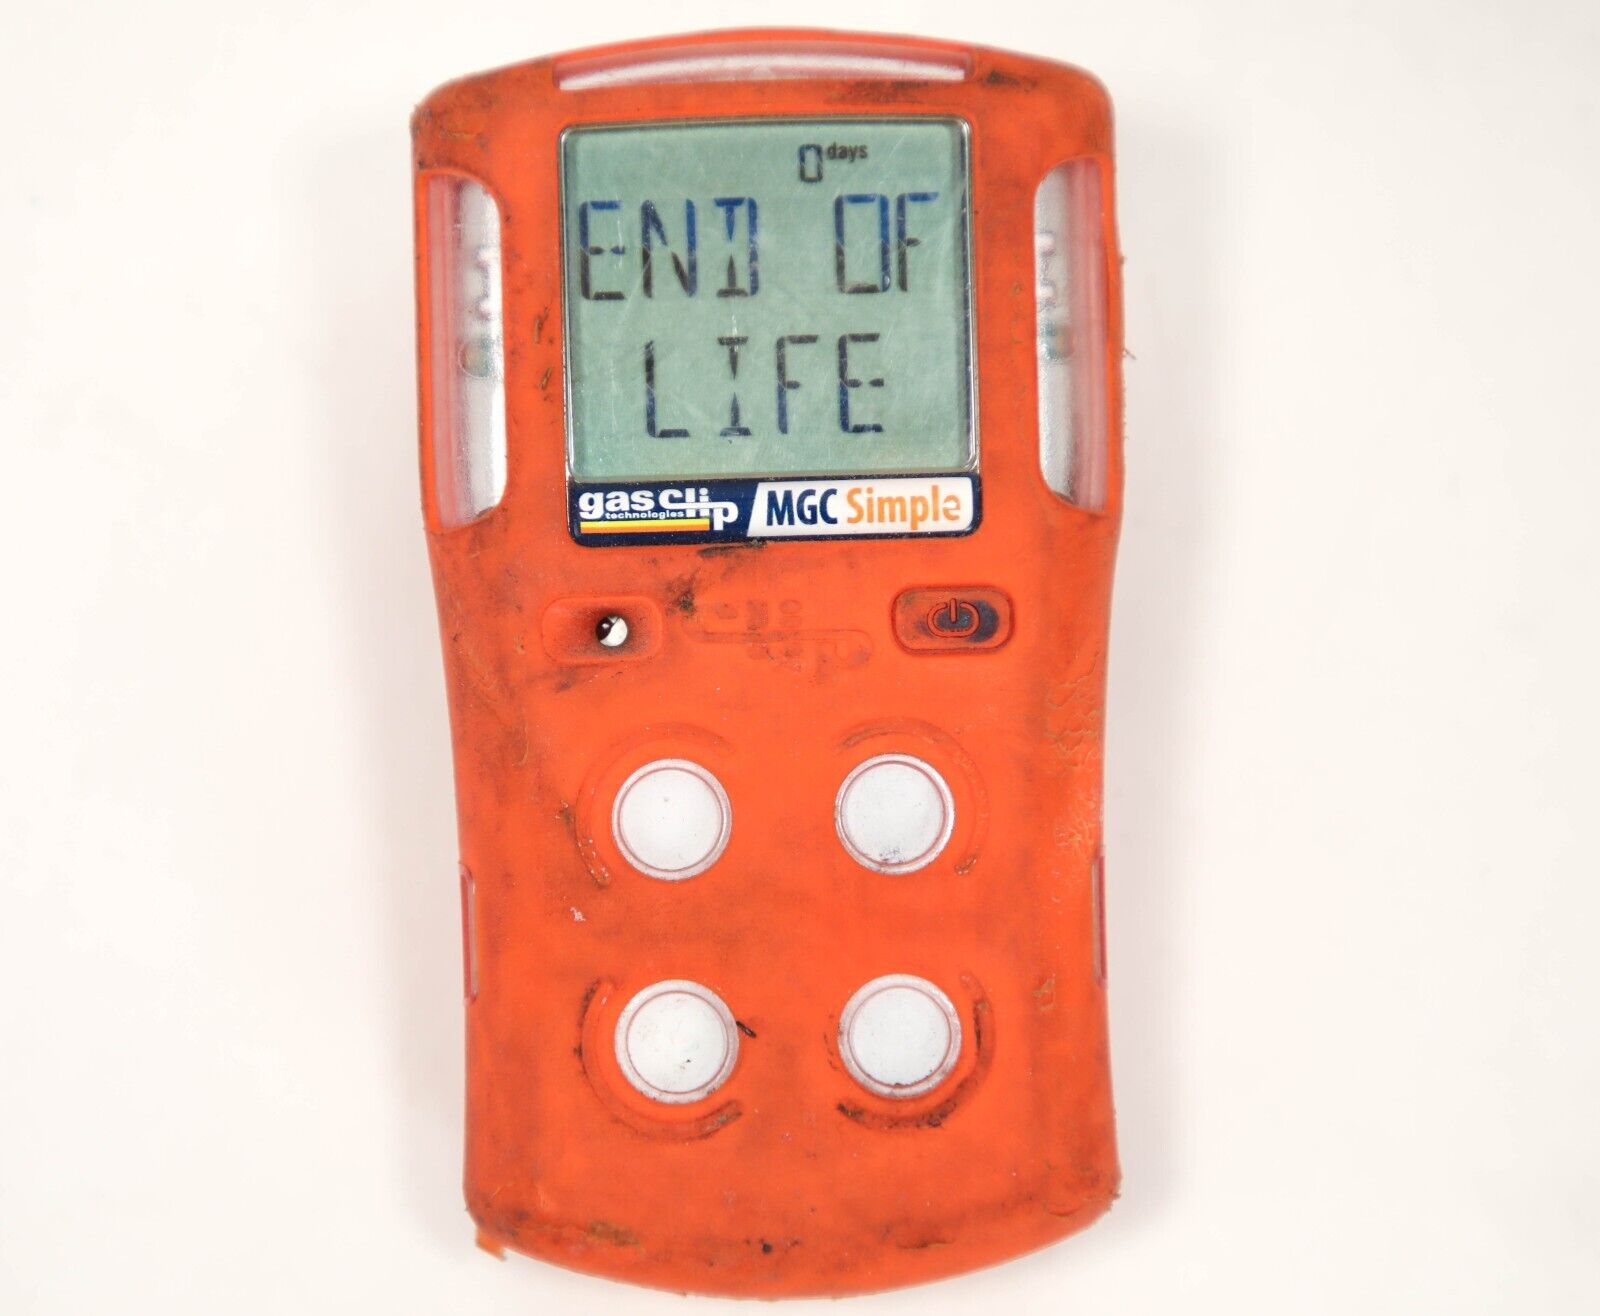 Gasclip Multi Gas Detector Mgc-simple - Expired, End Of Life